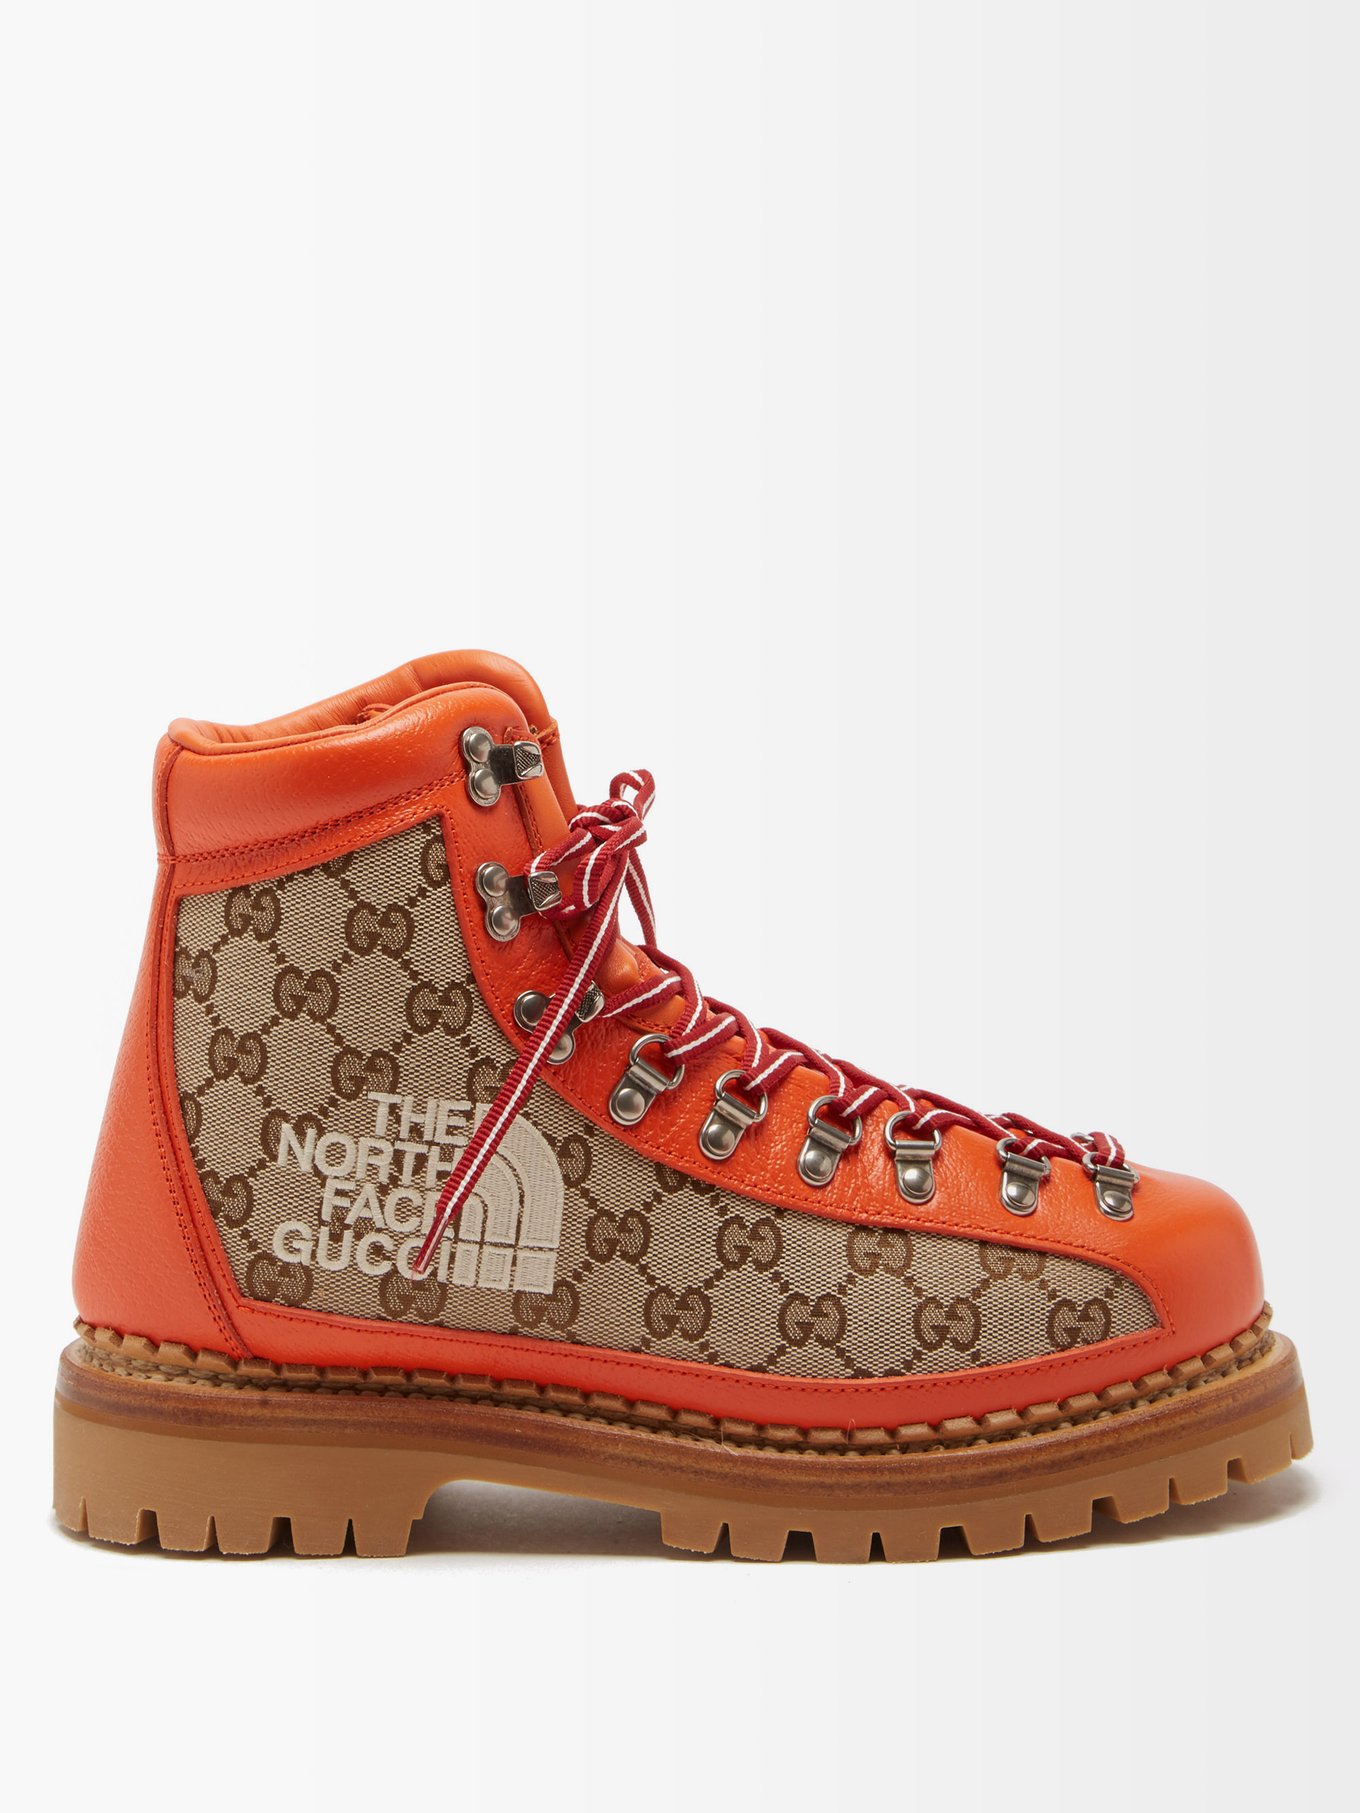 X The North Face GG-canvas boots | Gucci